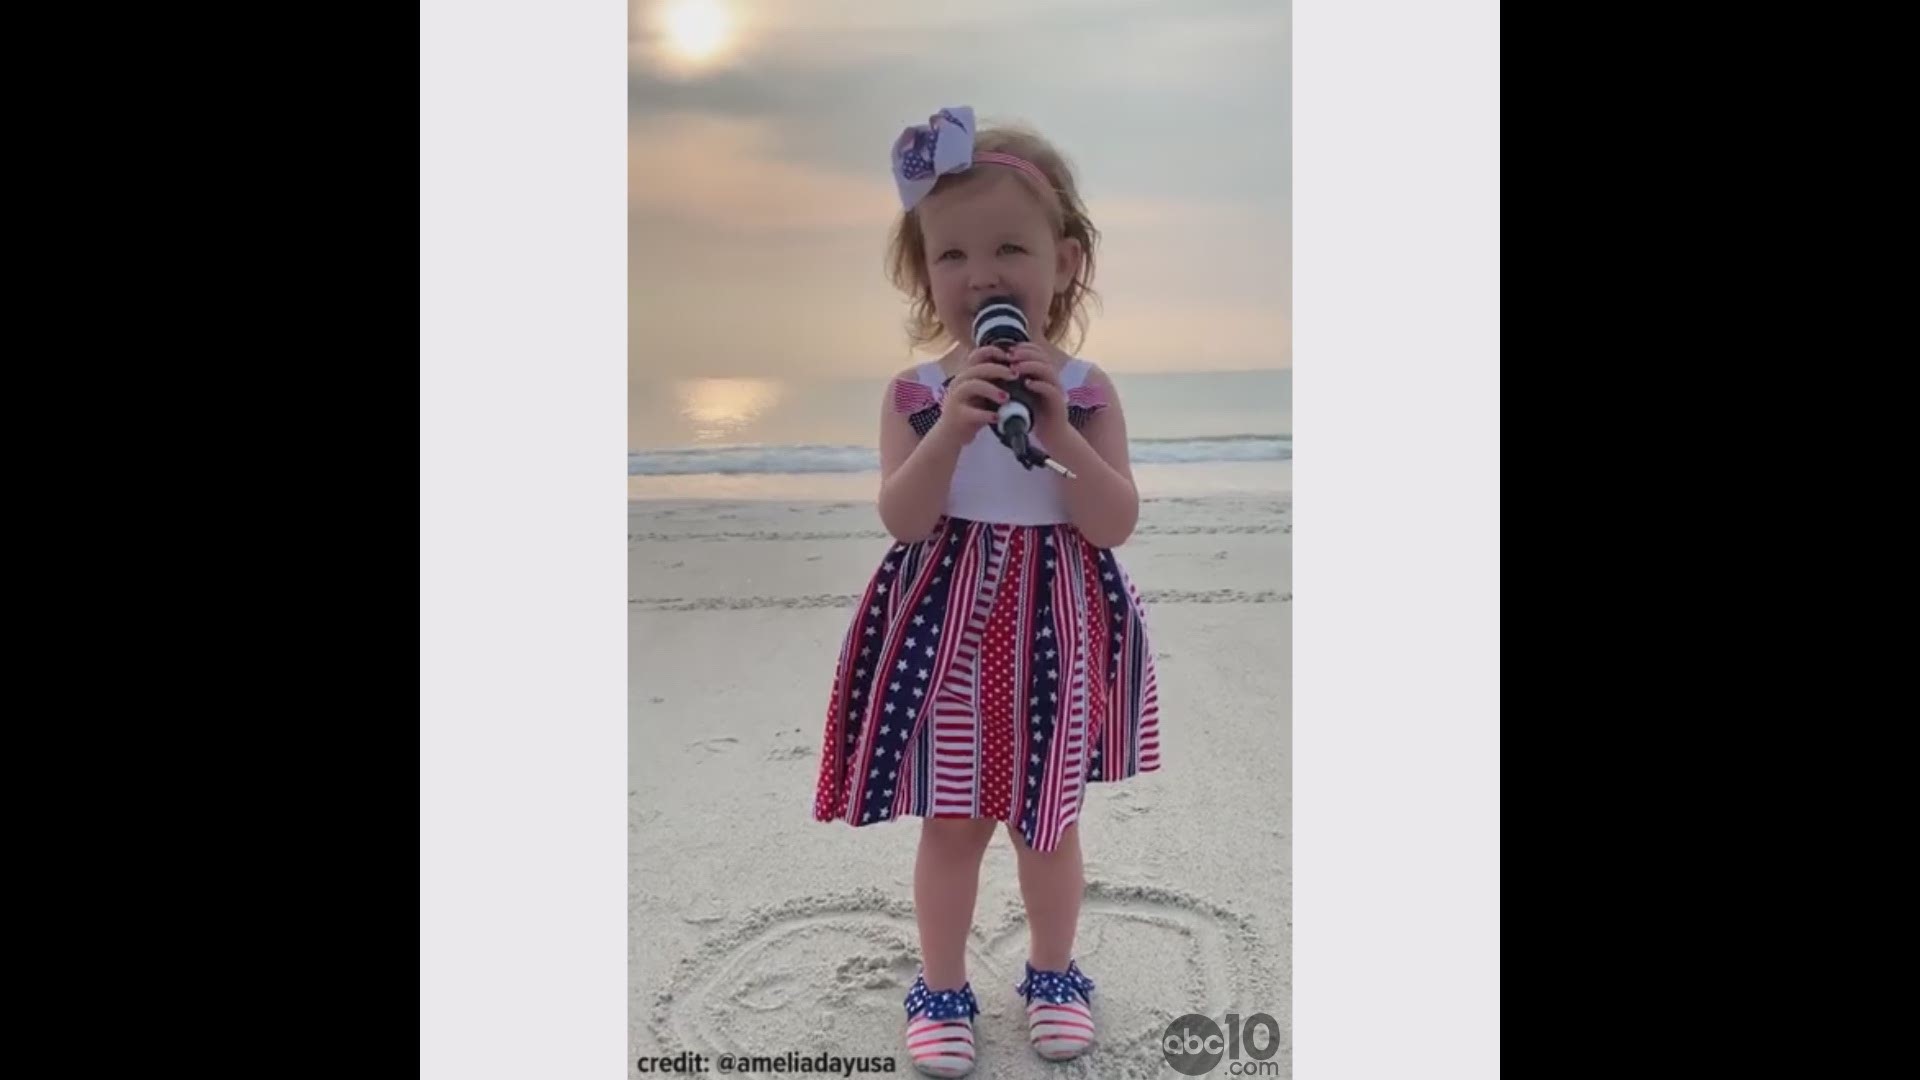 GOD BLESS AMERICA | Remember 2-year-old Amelia, the little girl who stole our hearts by singing the national anthem on Memorial Day? That video was watched more than 16 million times! 

Now Amelia Day is back with her adorable cover of God Bless America.